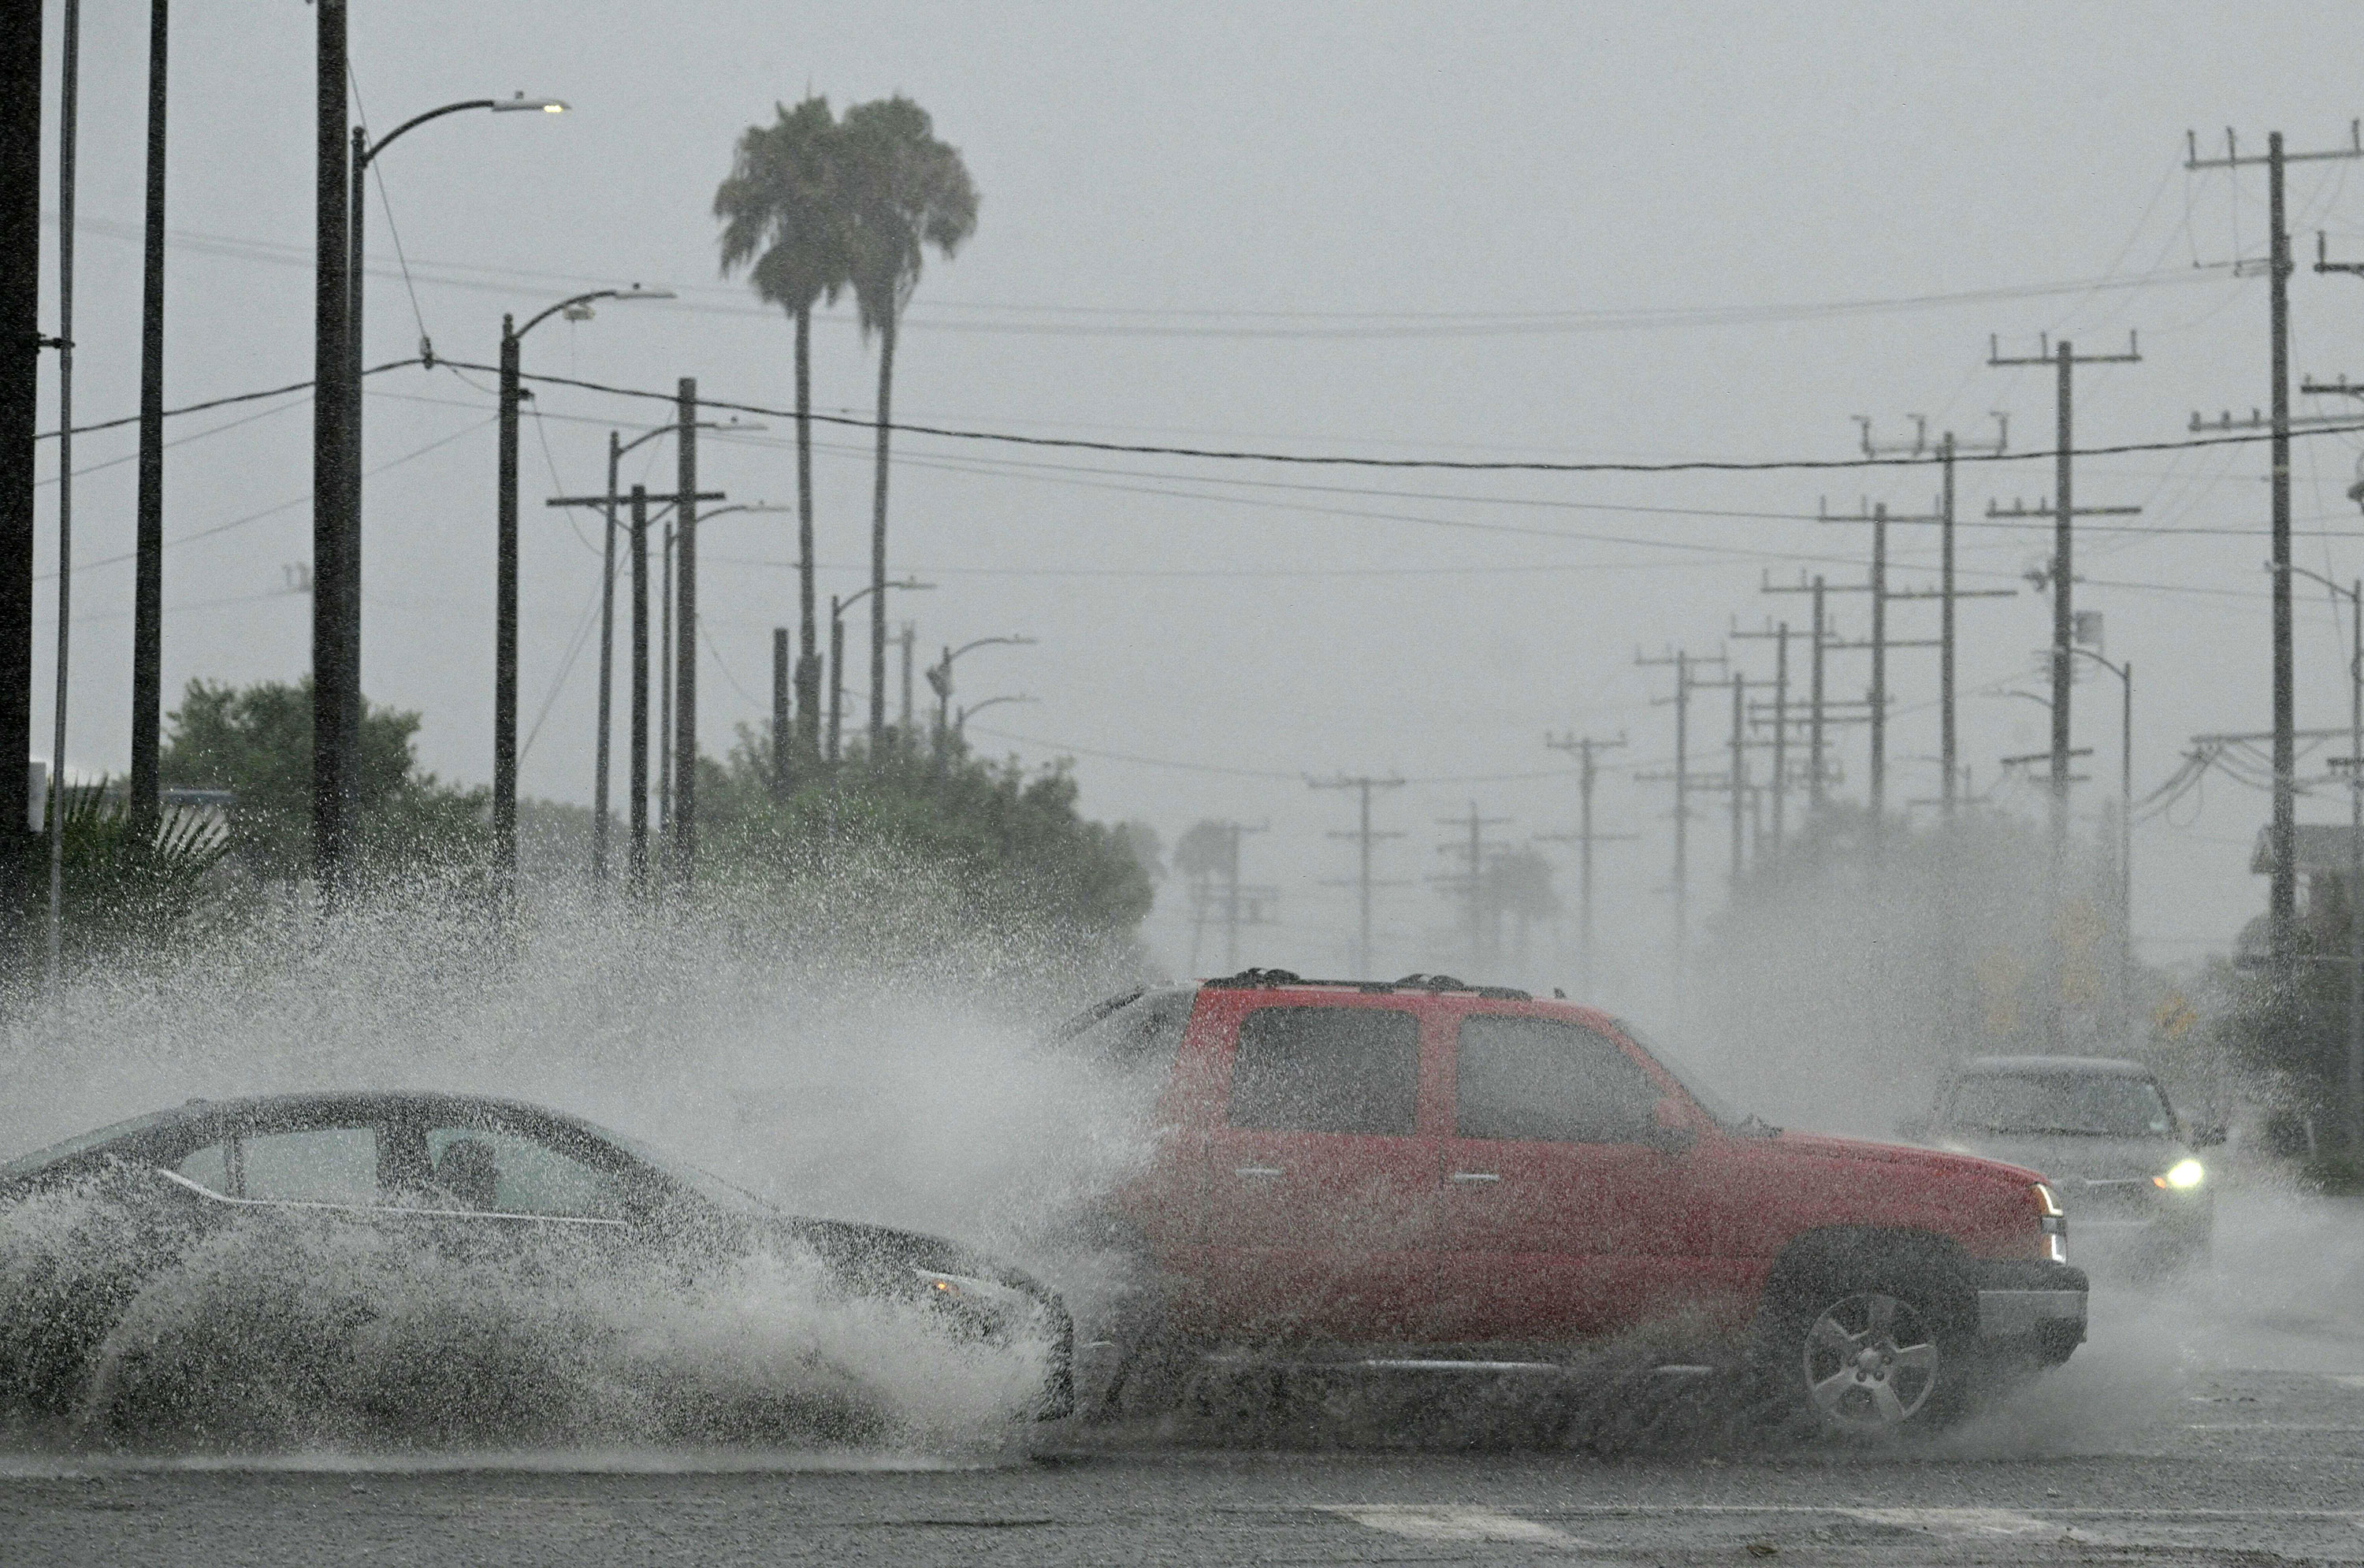 Vehicles splash up water during heavy rains from Tropical Storm Hilary in Los Angeles on Sunday, August 20. 